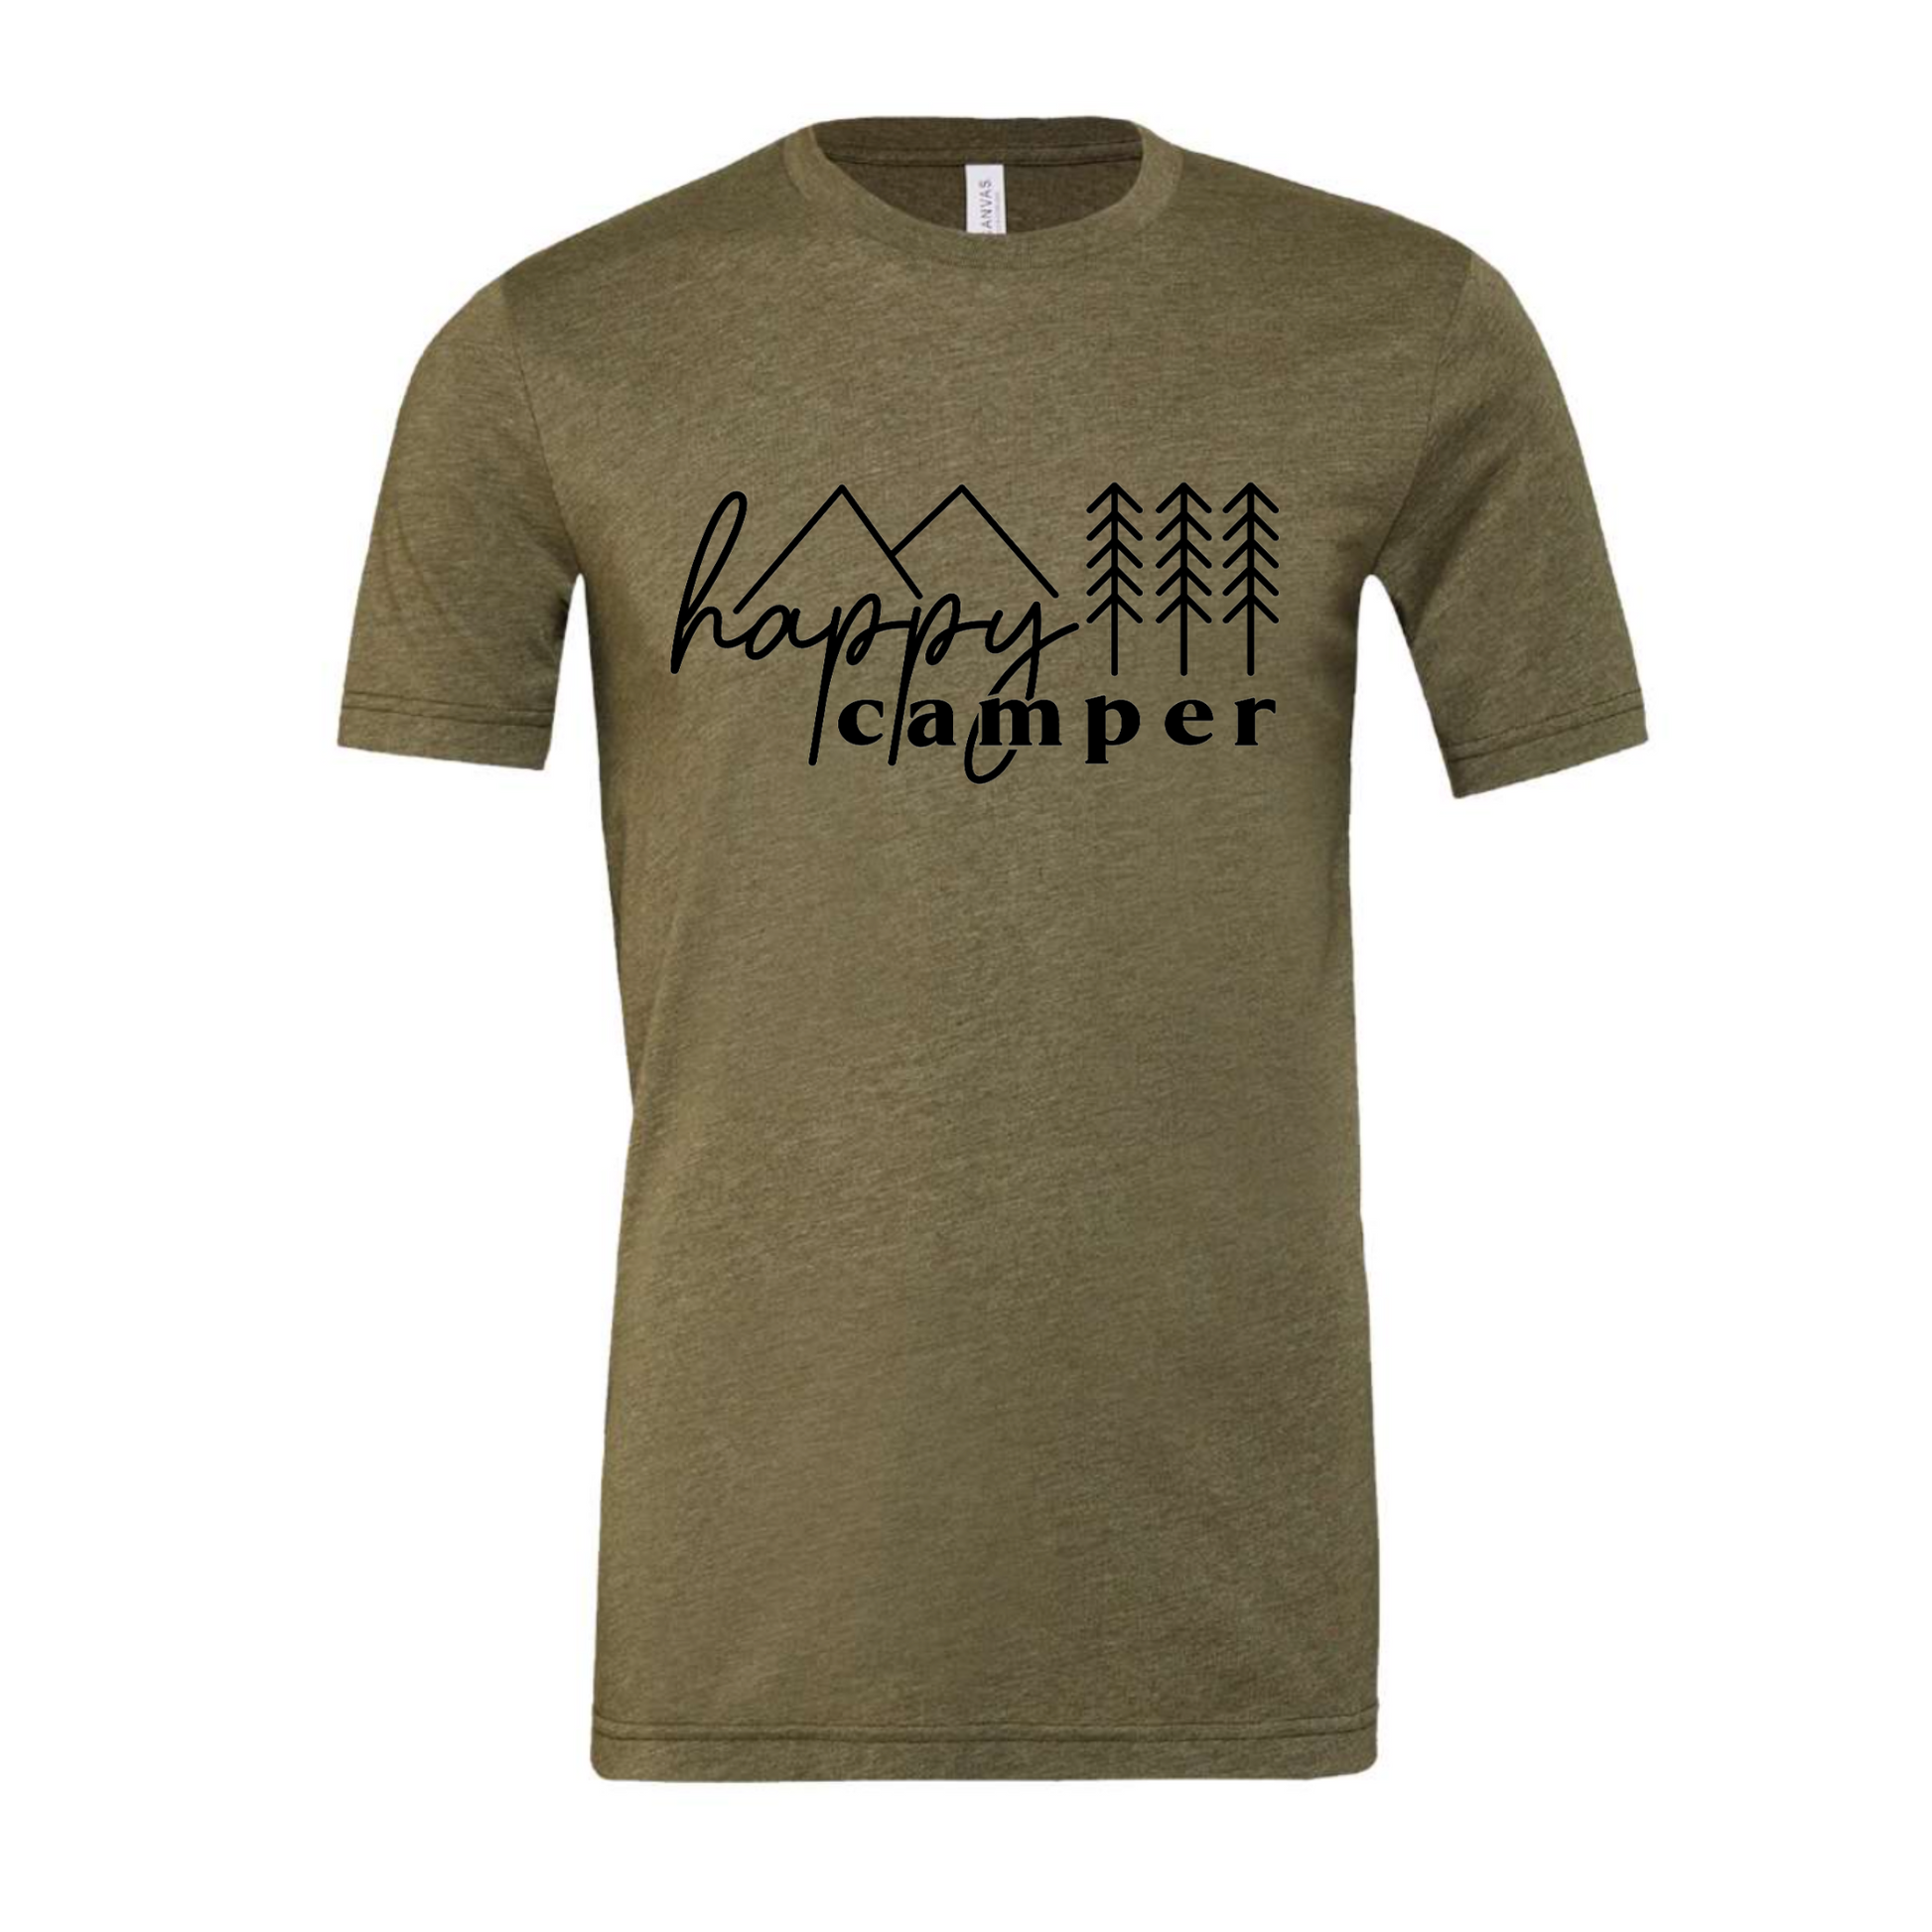 Happy Camper T-Shirt in Heather Olive. The front has a cursive font "happy" with "camper" below it in a bold lowercase font. Two triangle mountains are above the word happy, and three pine trees are above the word camper. The design is in black. This is the front view of the shirt.